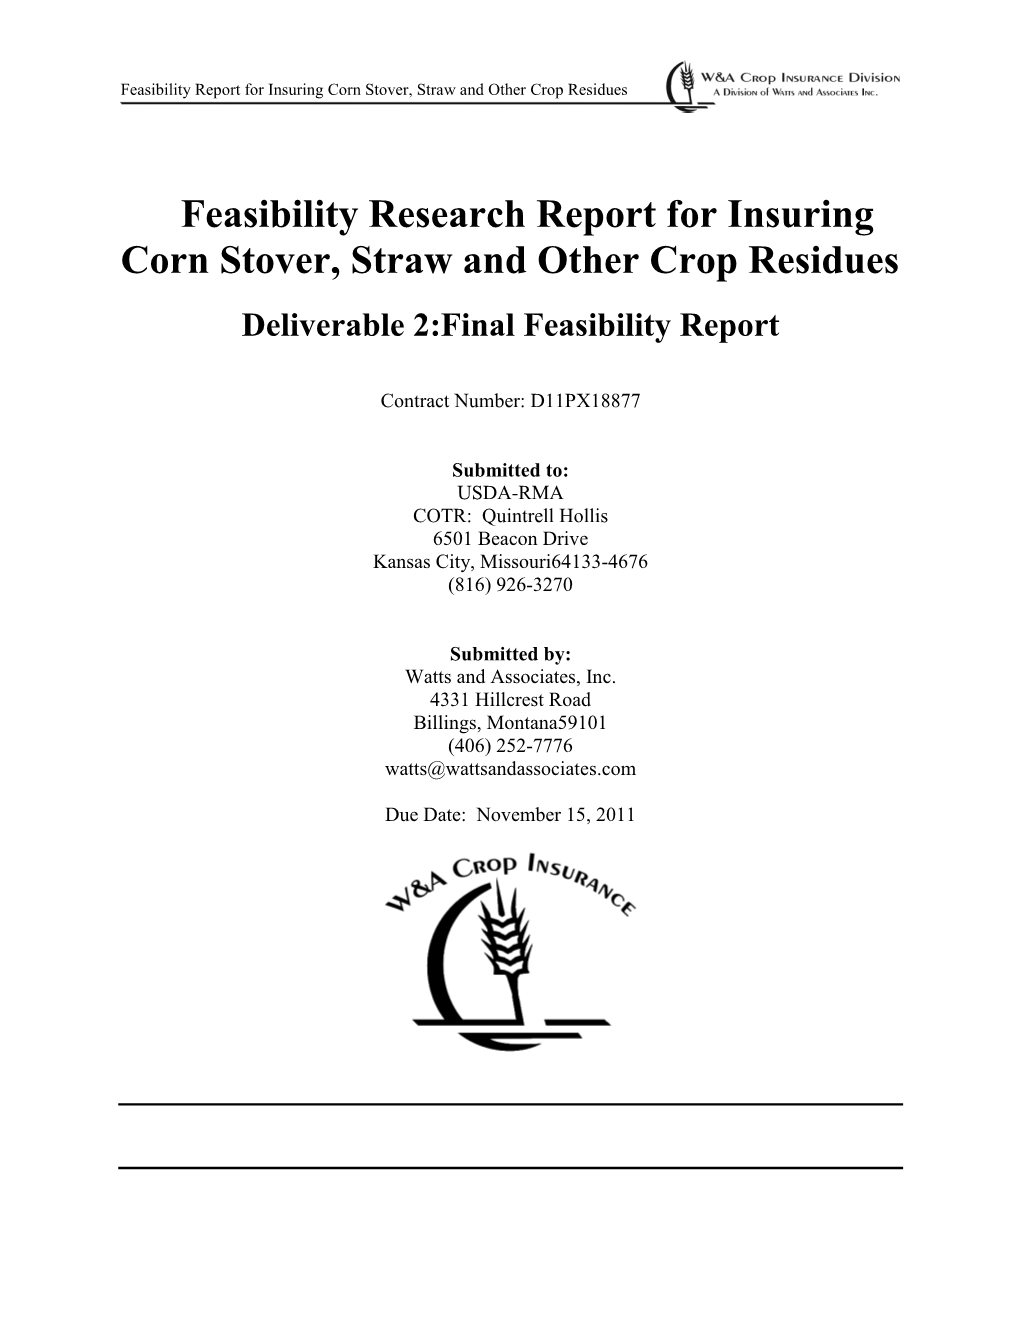 Feasibility Research Report for Insuring Corn Stover, Straw and Other Crop Residues